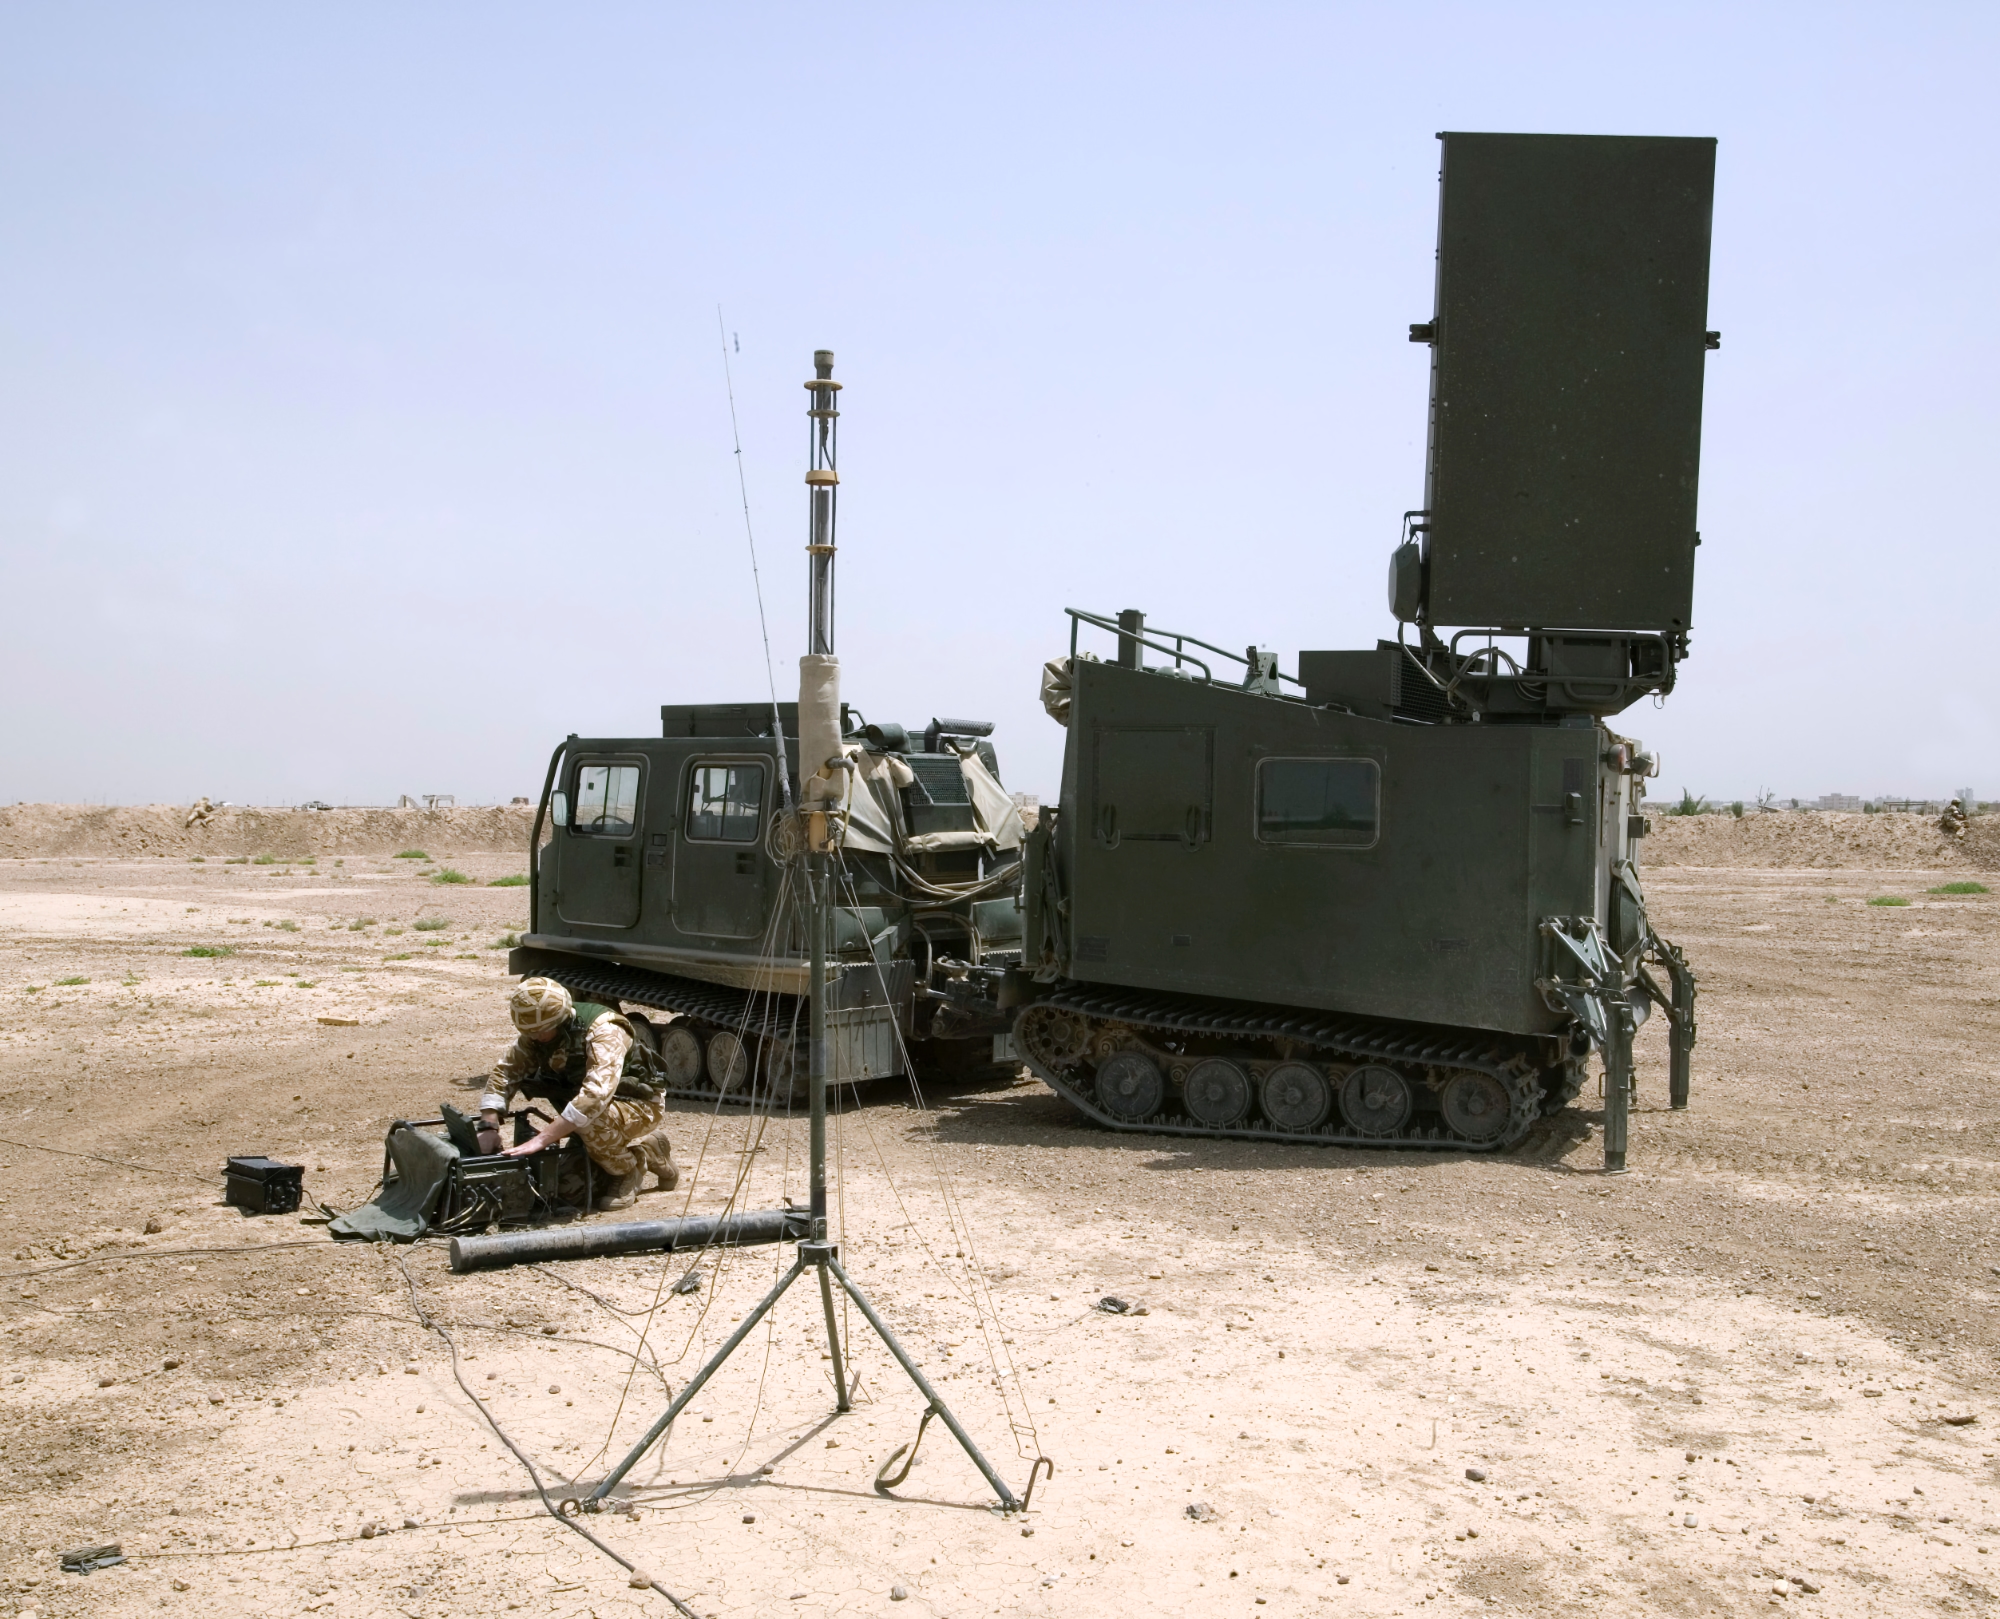 The AFU uses the MAMBA counterbattery system, which detects and classifies artillery, rockets and mortars, as well as targeting M777 howitzers, HIMARS and M270 MLRS